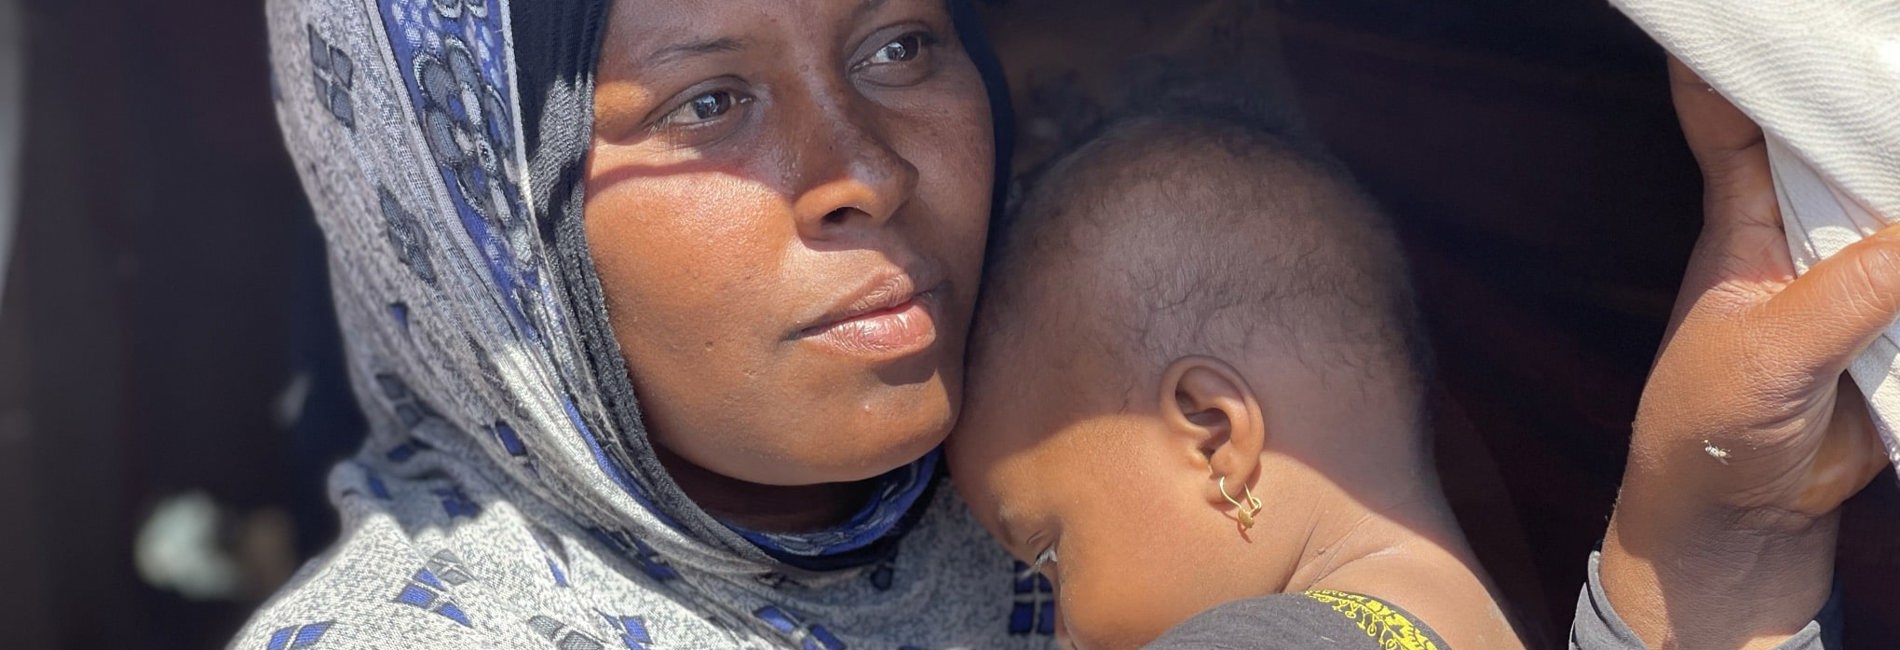 Internally displaced Yemeni mother, Lubna, holds her child after fleeing escalating fighting.